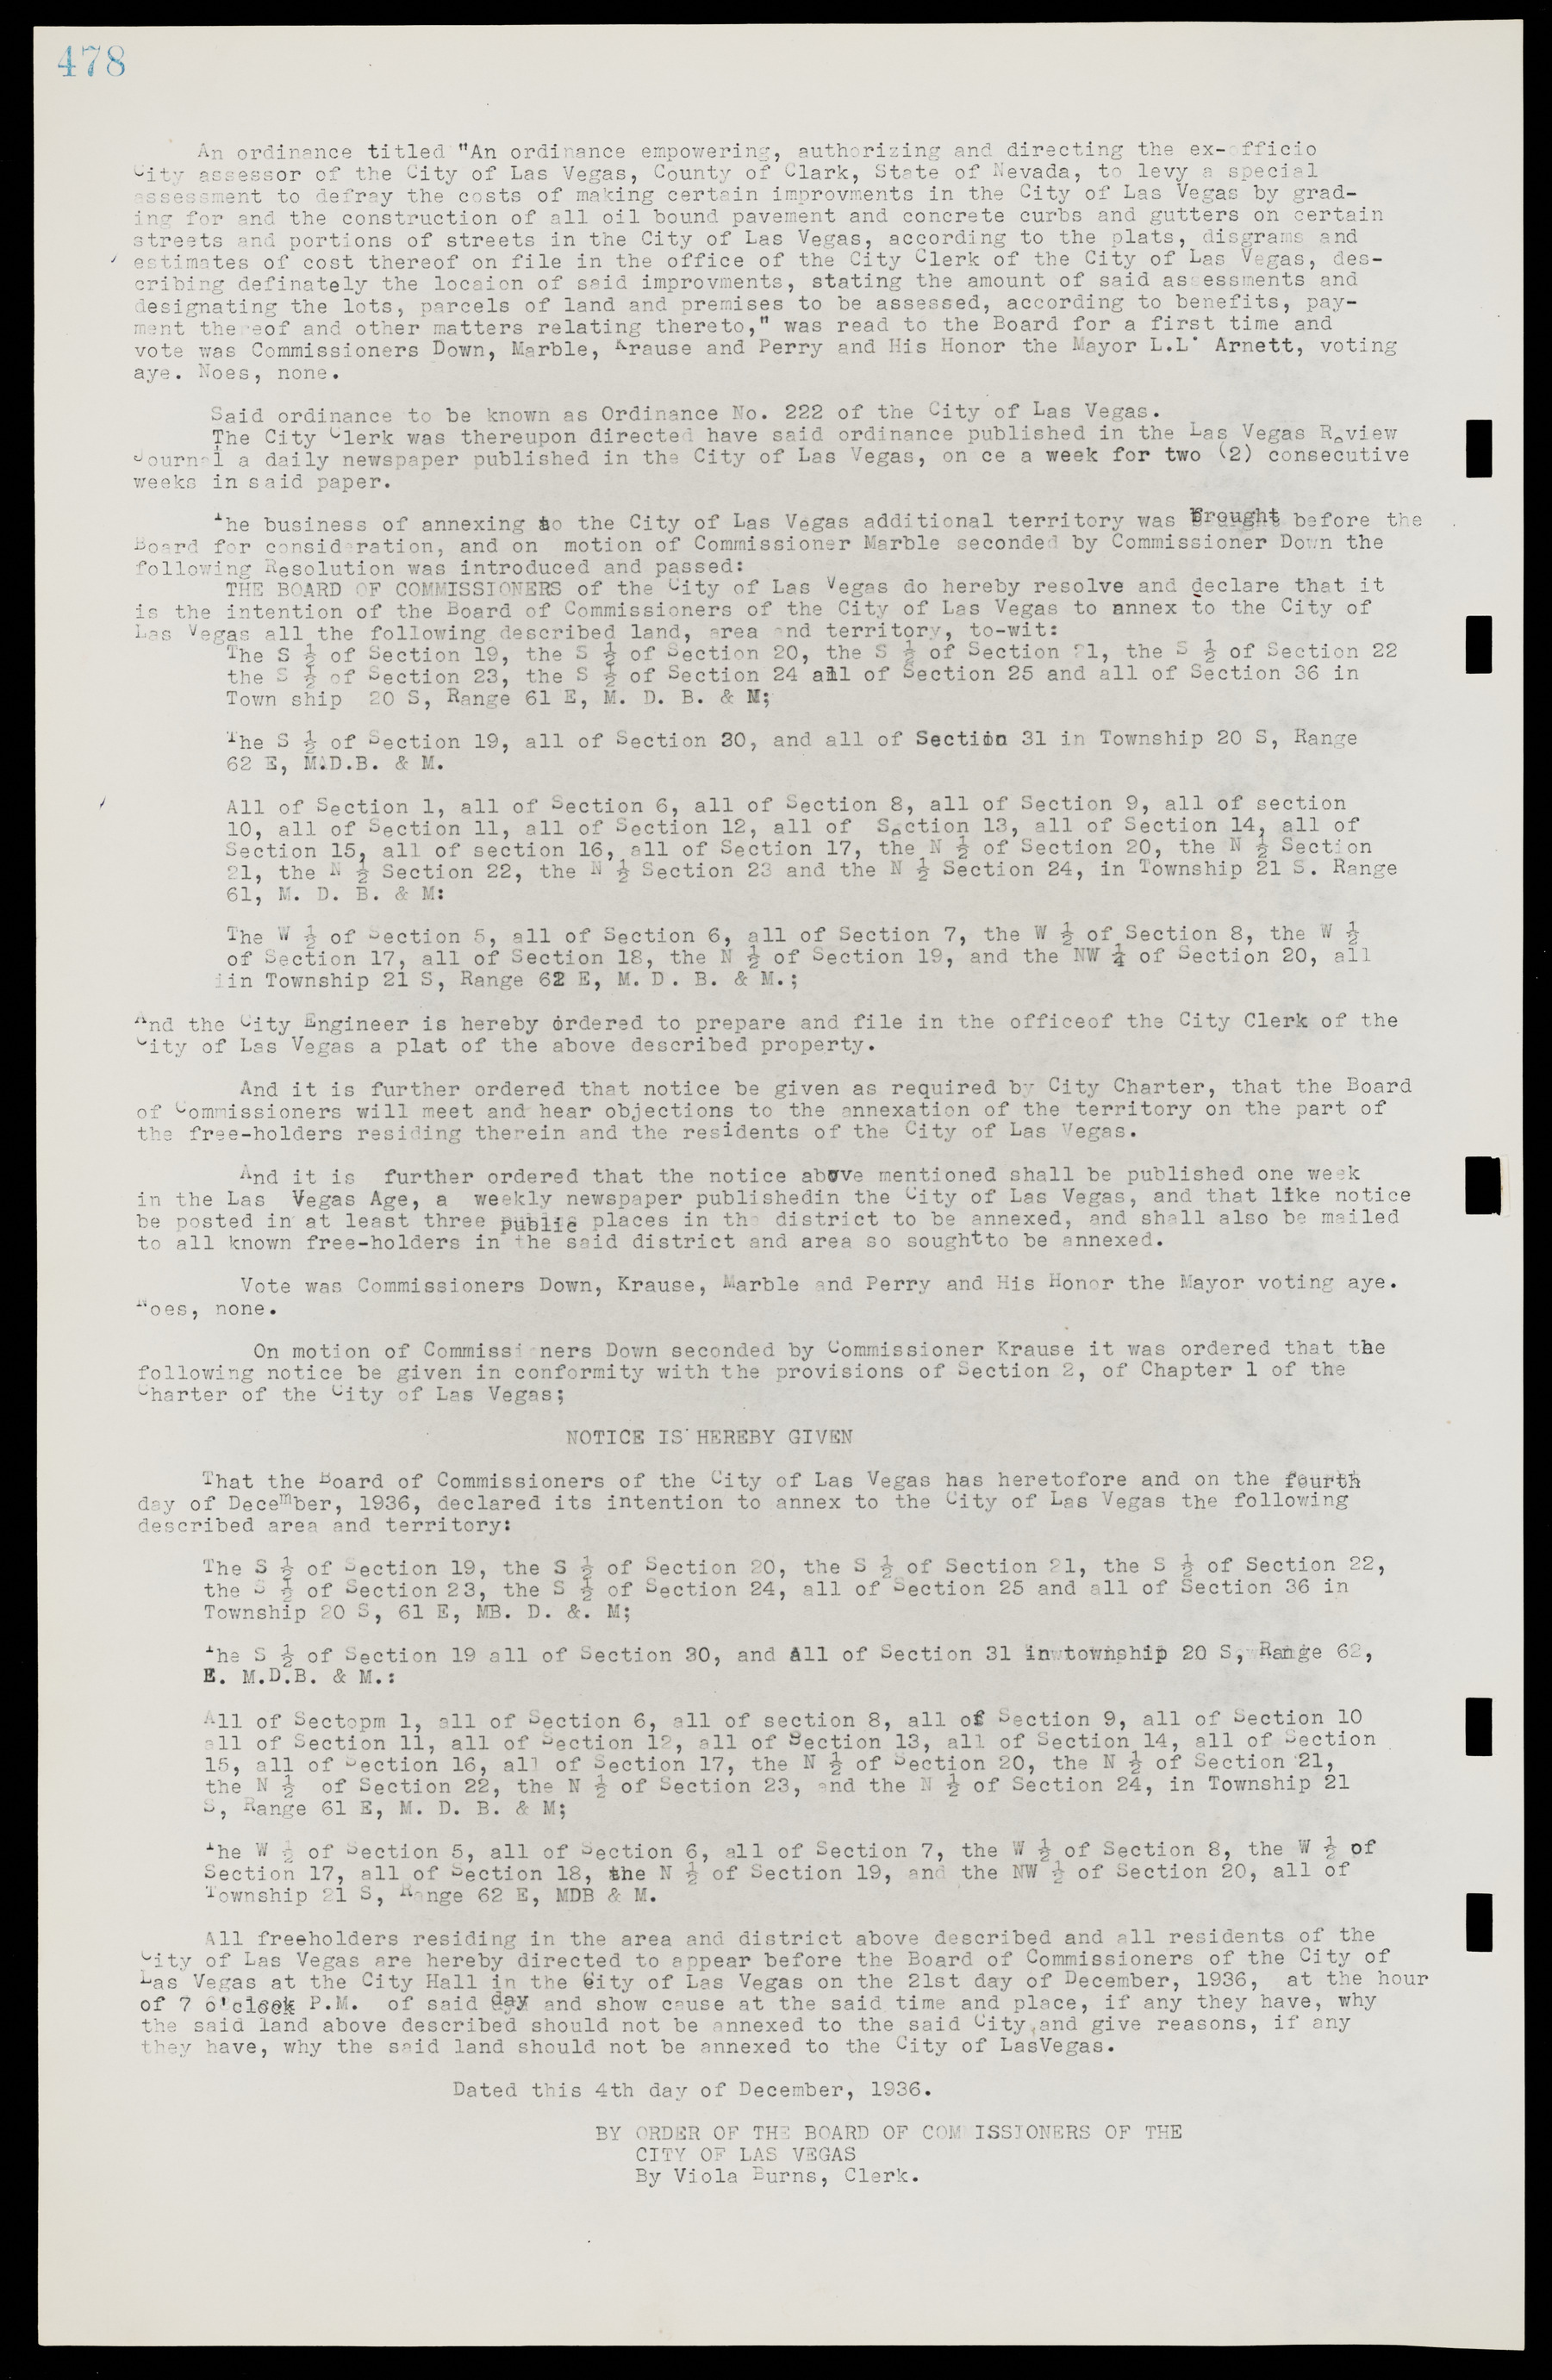 Las Vegas City Commission Minutes, May 14, 1929 to February 11, 1937, lvc000003-485